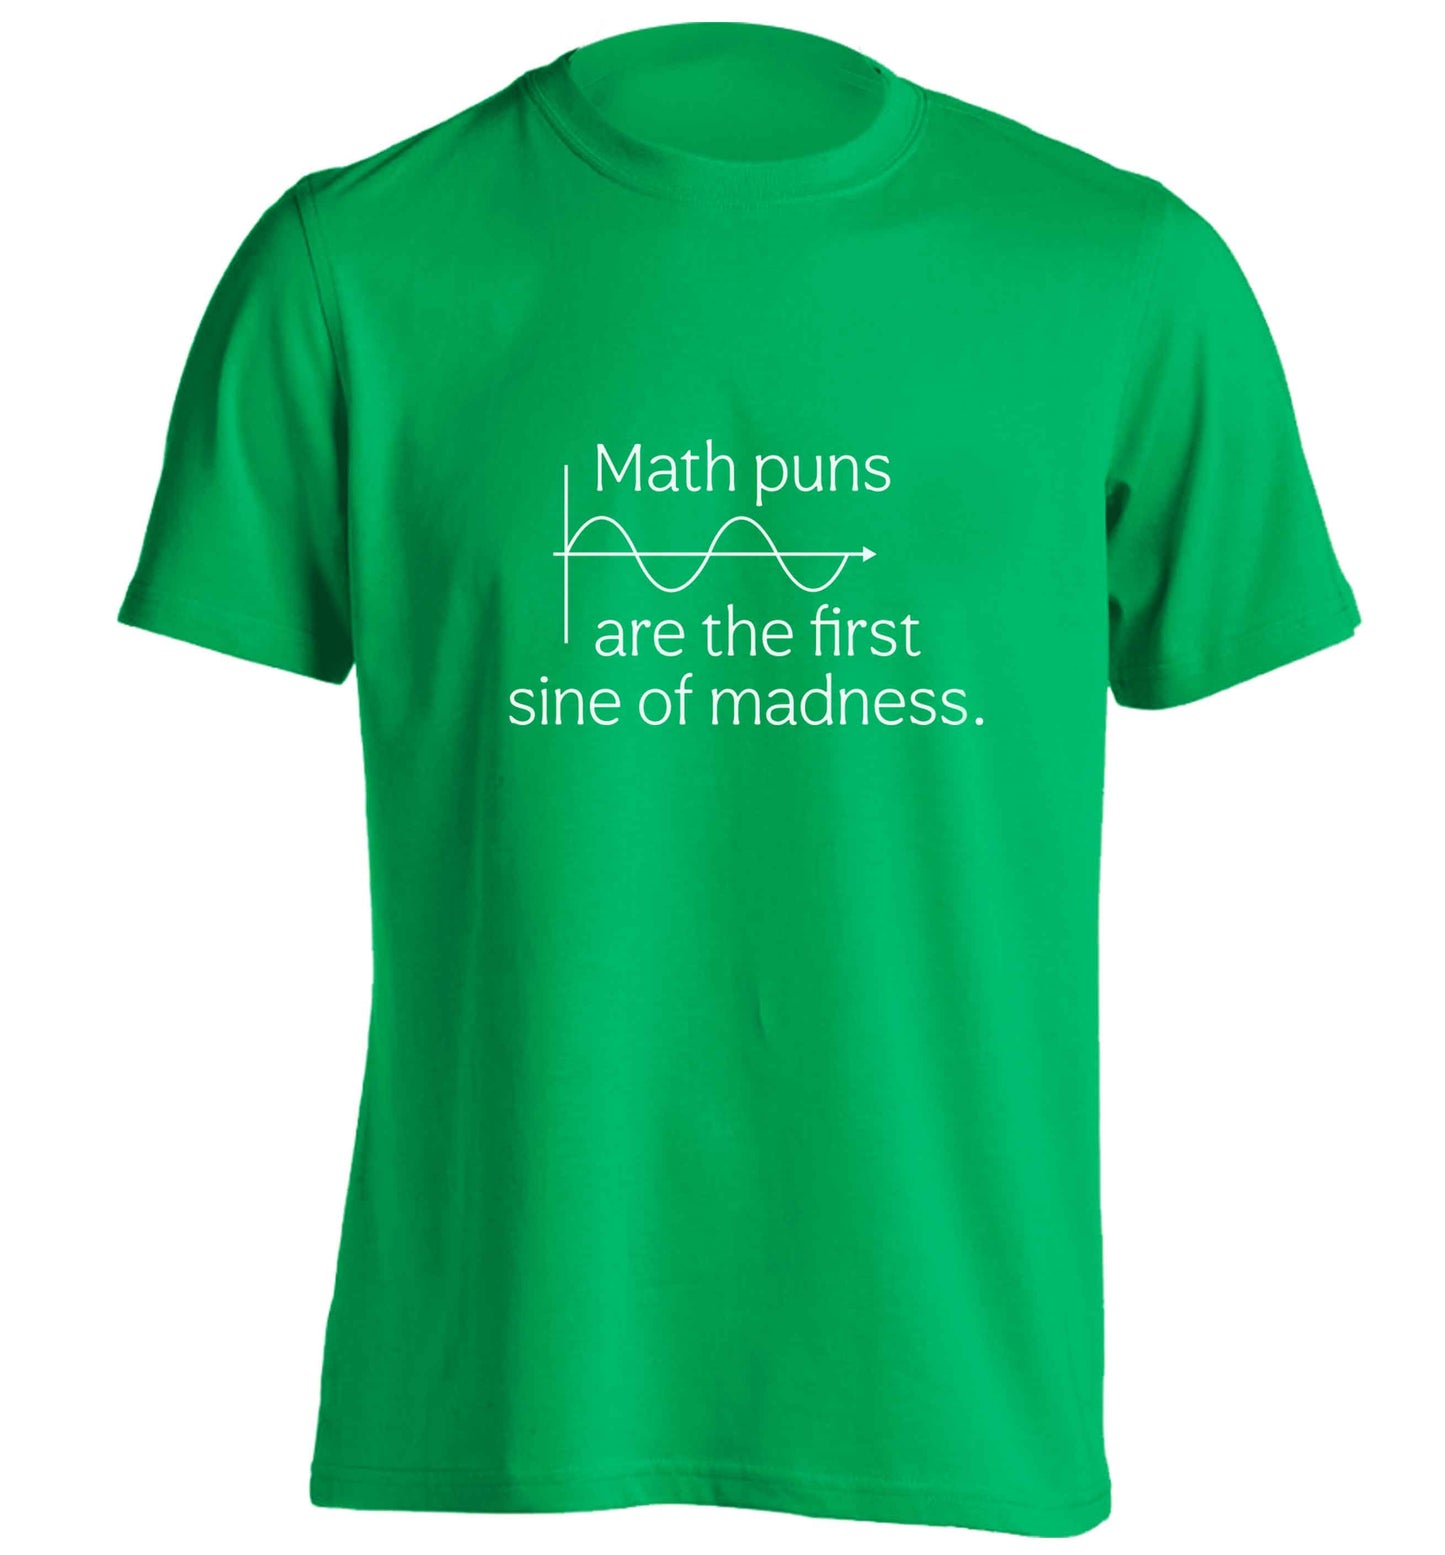 Math puns are the first sine of madness adults unisex green Tshirt 2XL